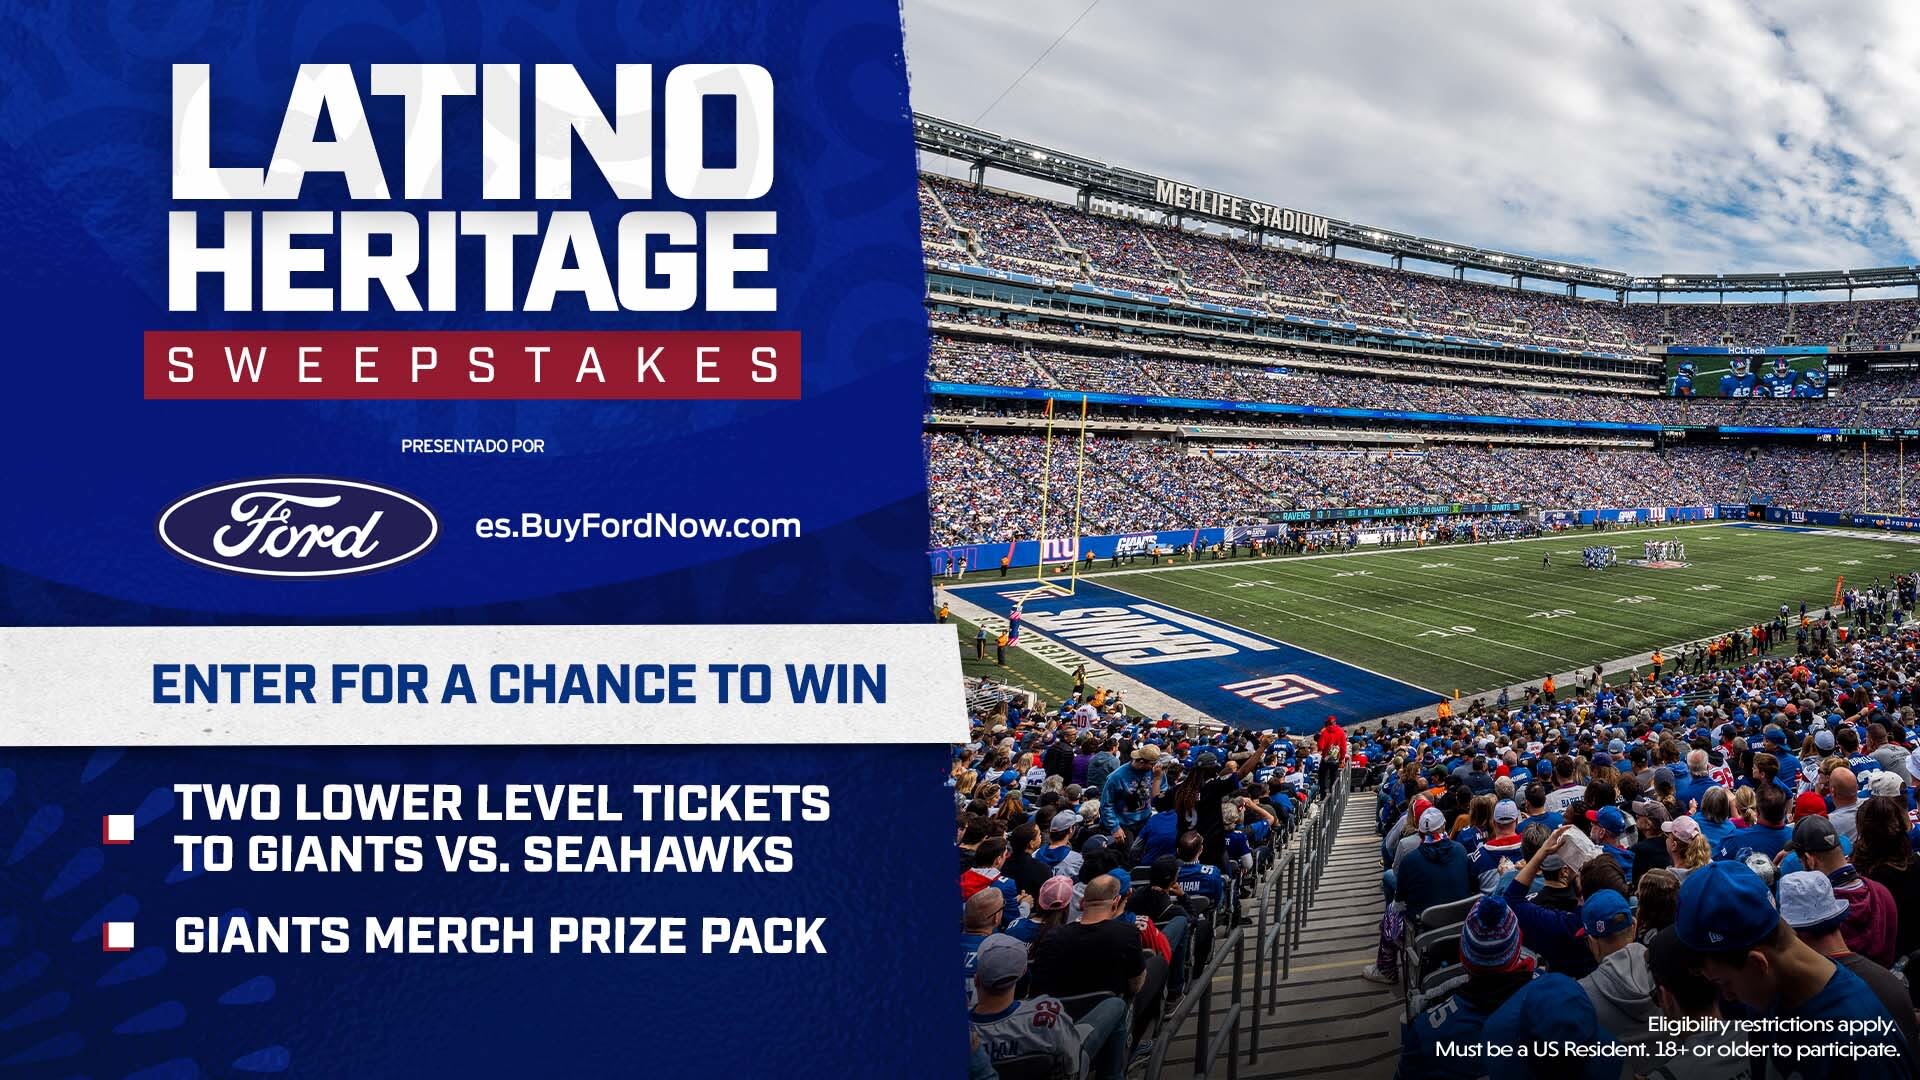 Enter for a chance to win two tickets to Giants vs. Seahawks and a Giants  prize pack